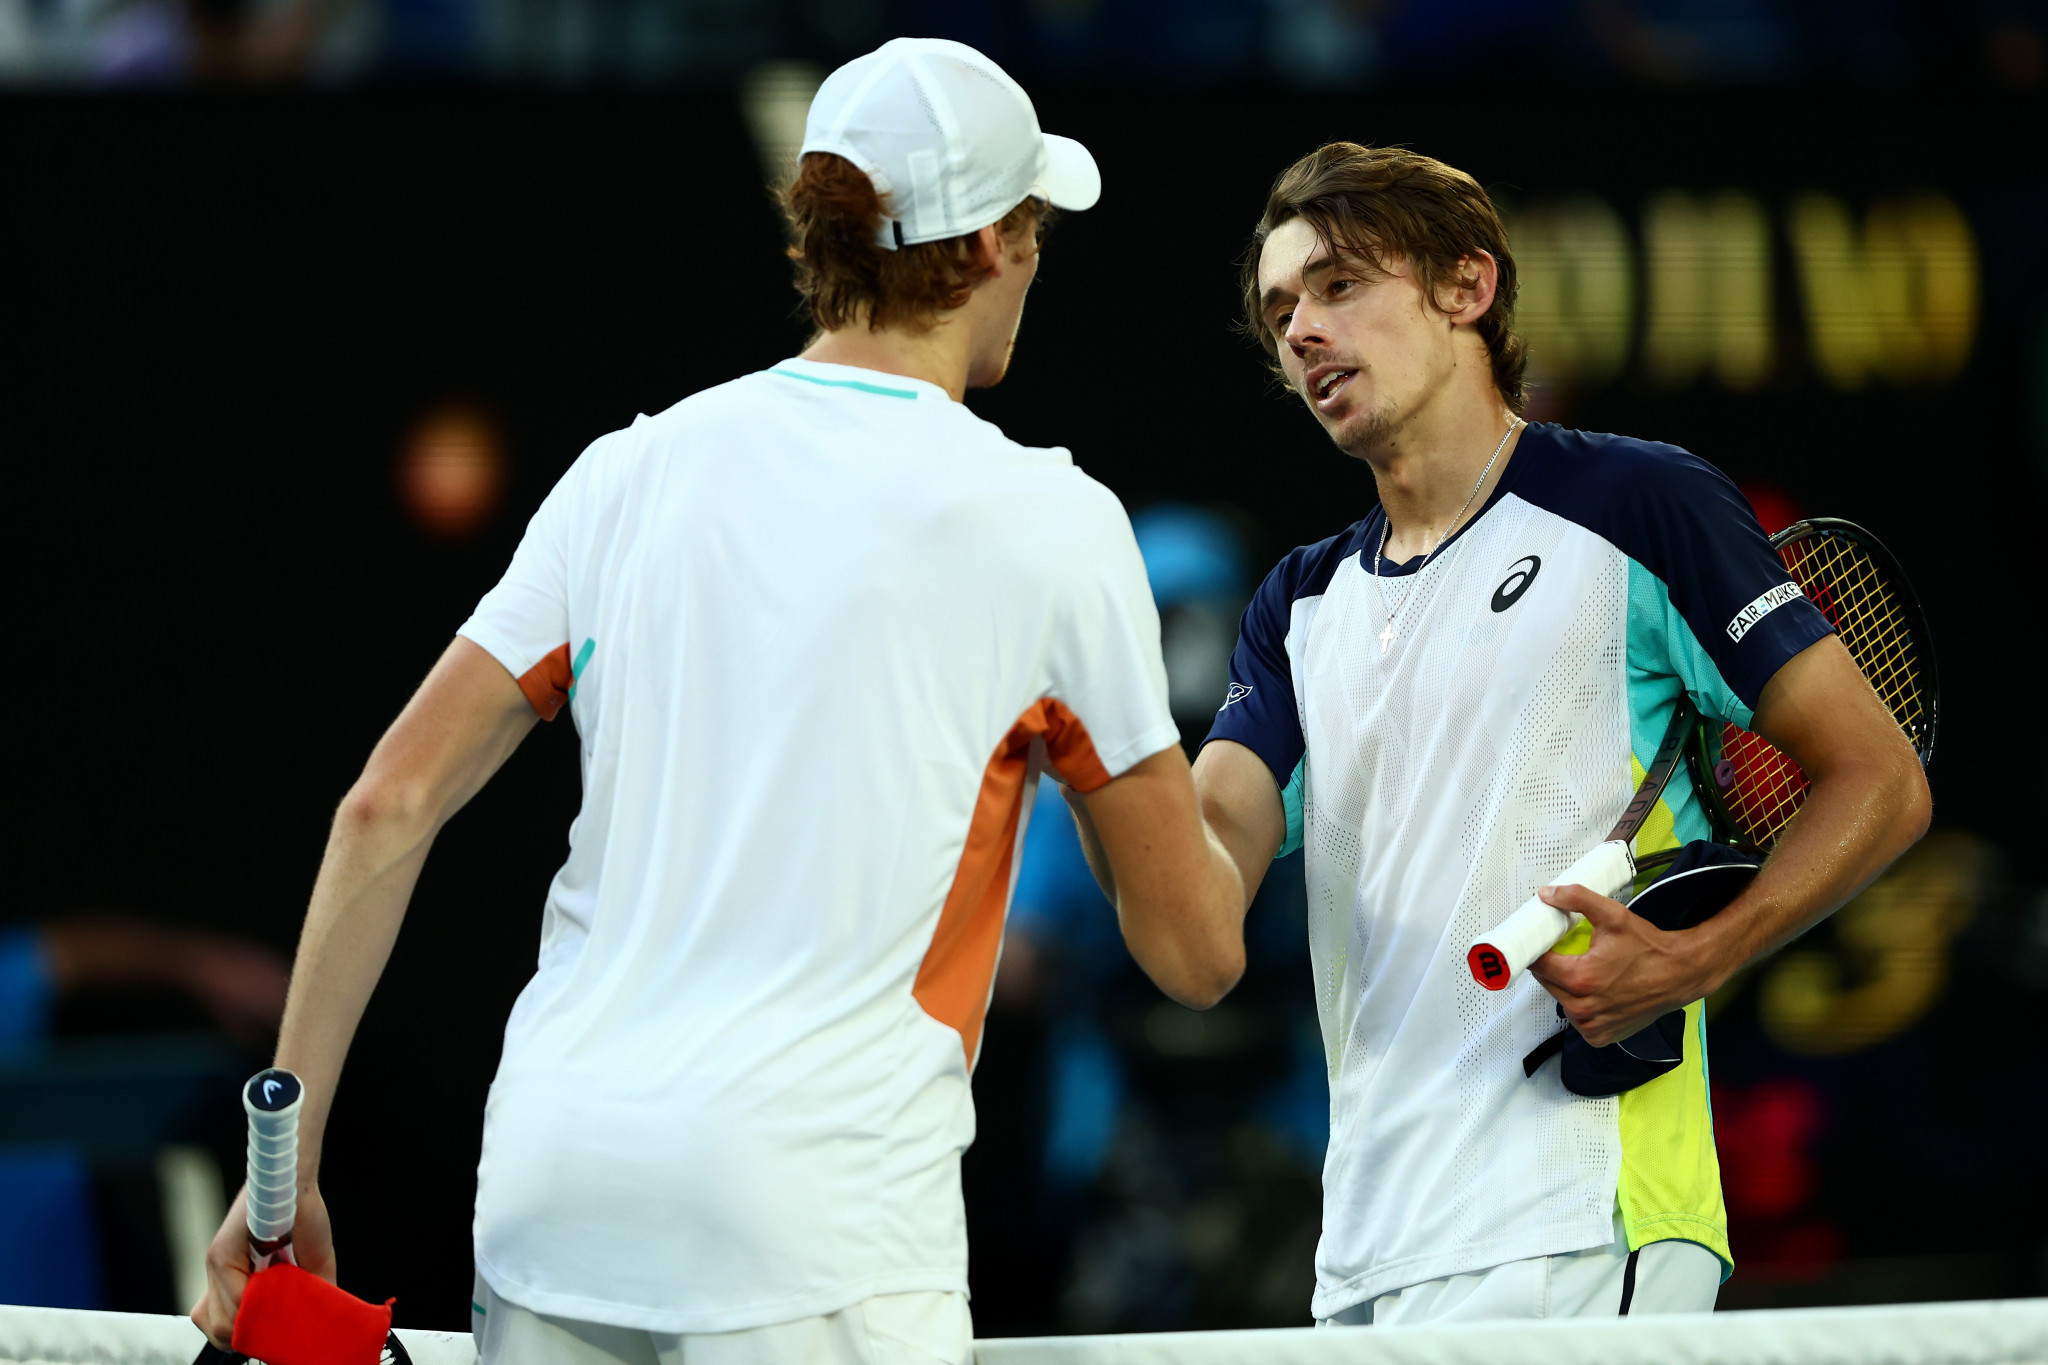 The host nation's hopes of success in the men's singles at the Australian Open were ended as Alex de Minaur, right, was beaten in straight sets by Italy's Jannik Sinner, left ©Getty Images